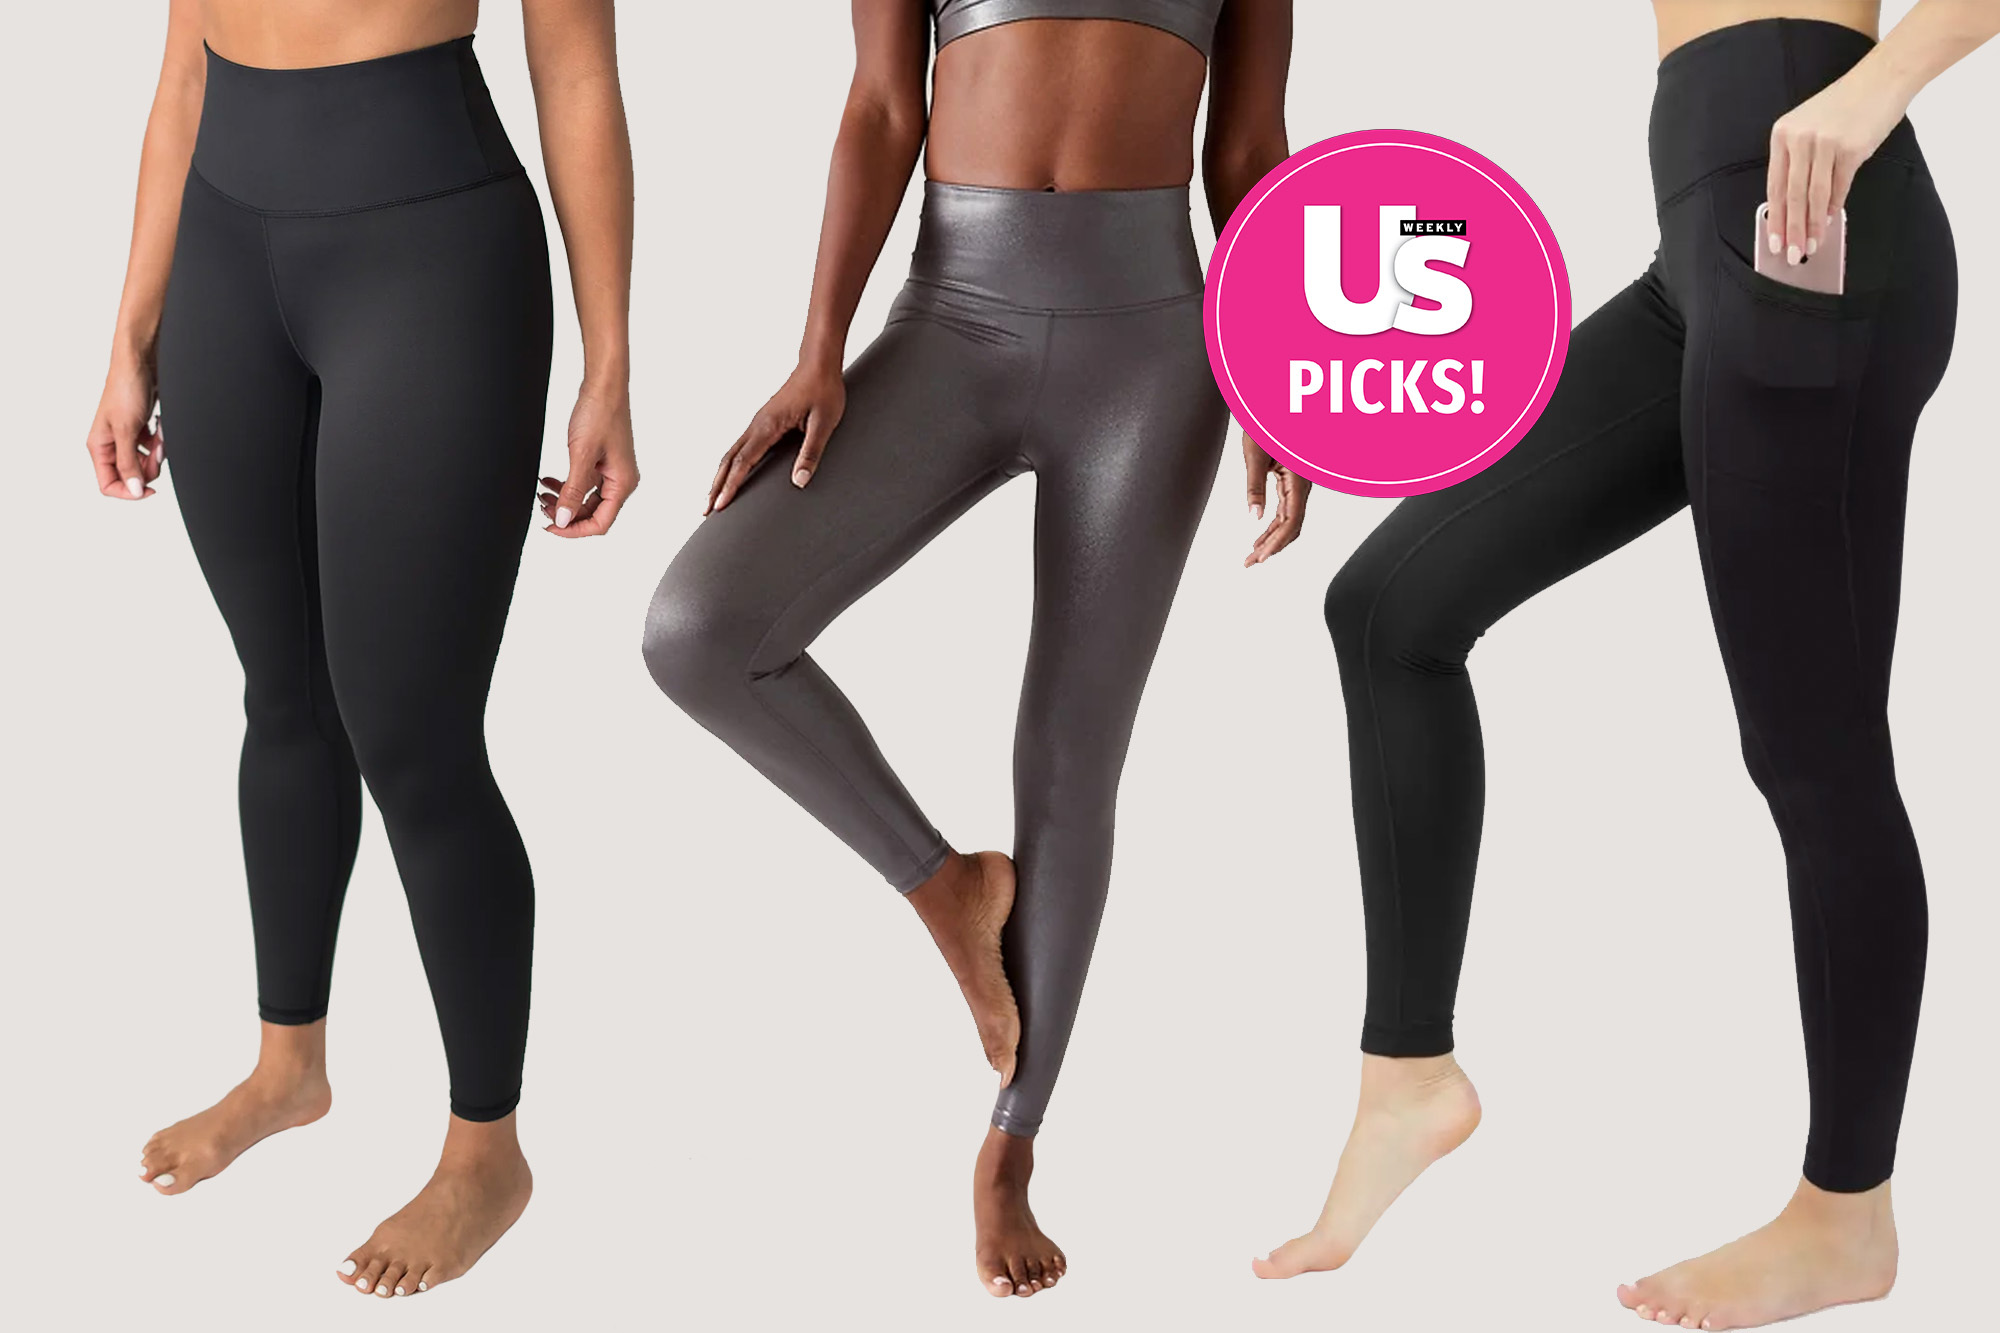 In the process of trying to find affordable comparable leggings to  fabletics. Why do they ALL fit like this and they're always high waisted?!  My waist isn't high enough for high waisted